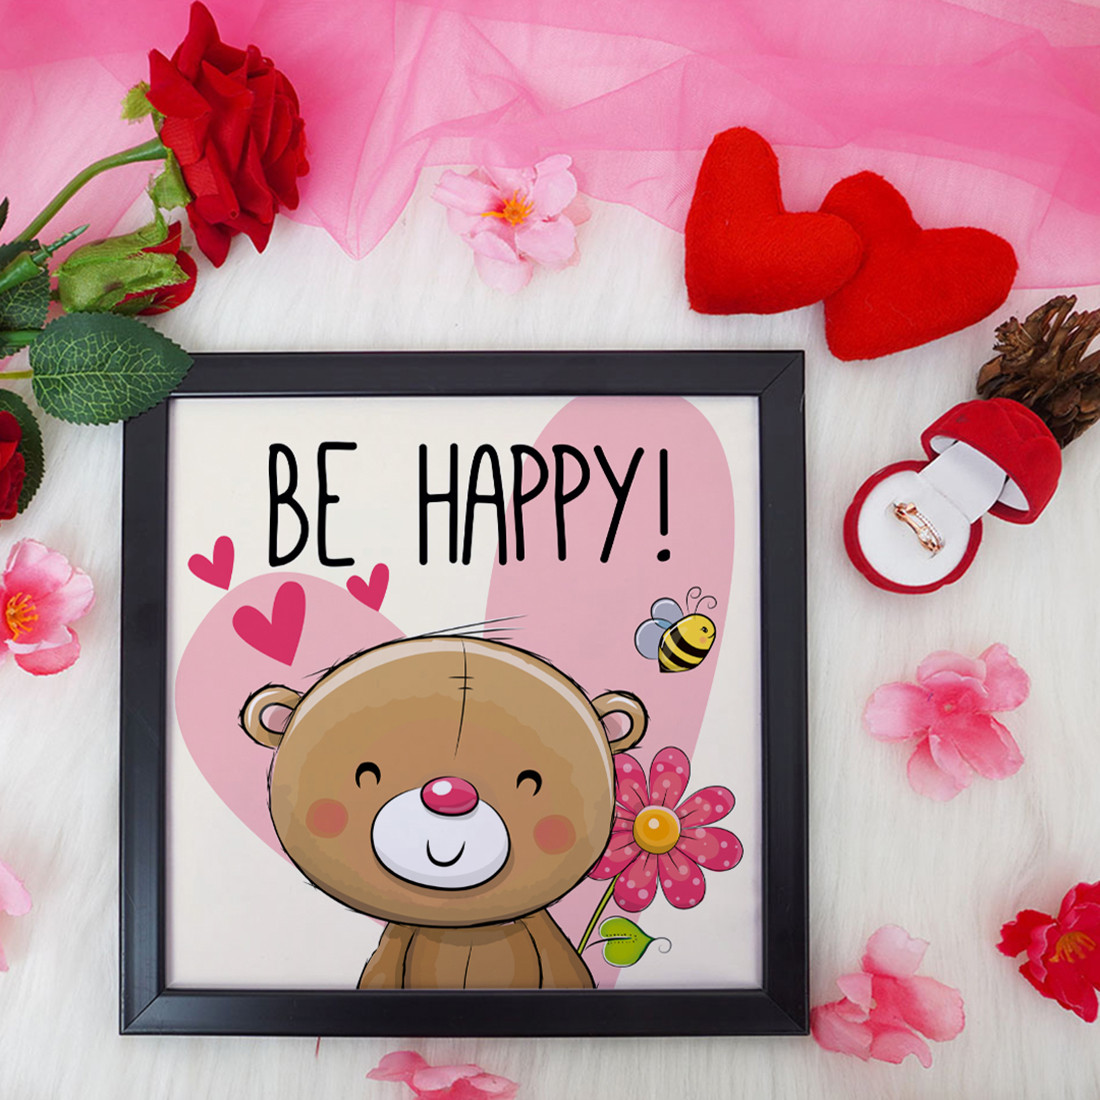 Be Happy Valentine Gift Set | Valentine's Day Gifts for Girlfriend | Valentine Gift for Wife | Ring for Women/Girl | Photo Frame (8x8 Inches)